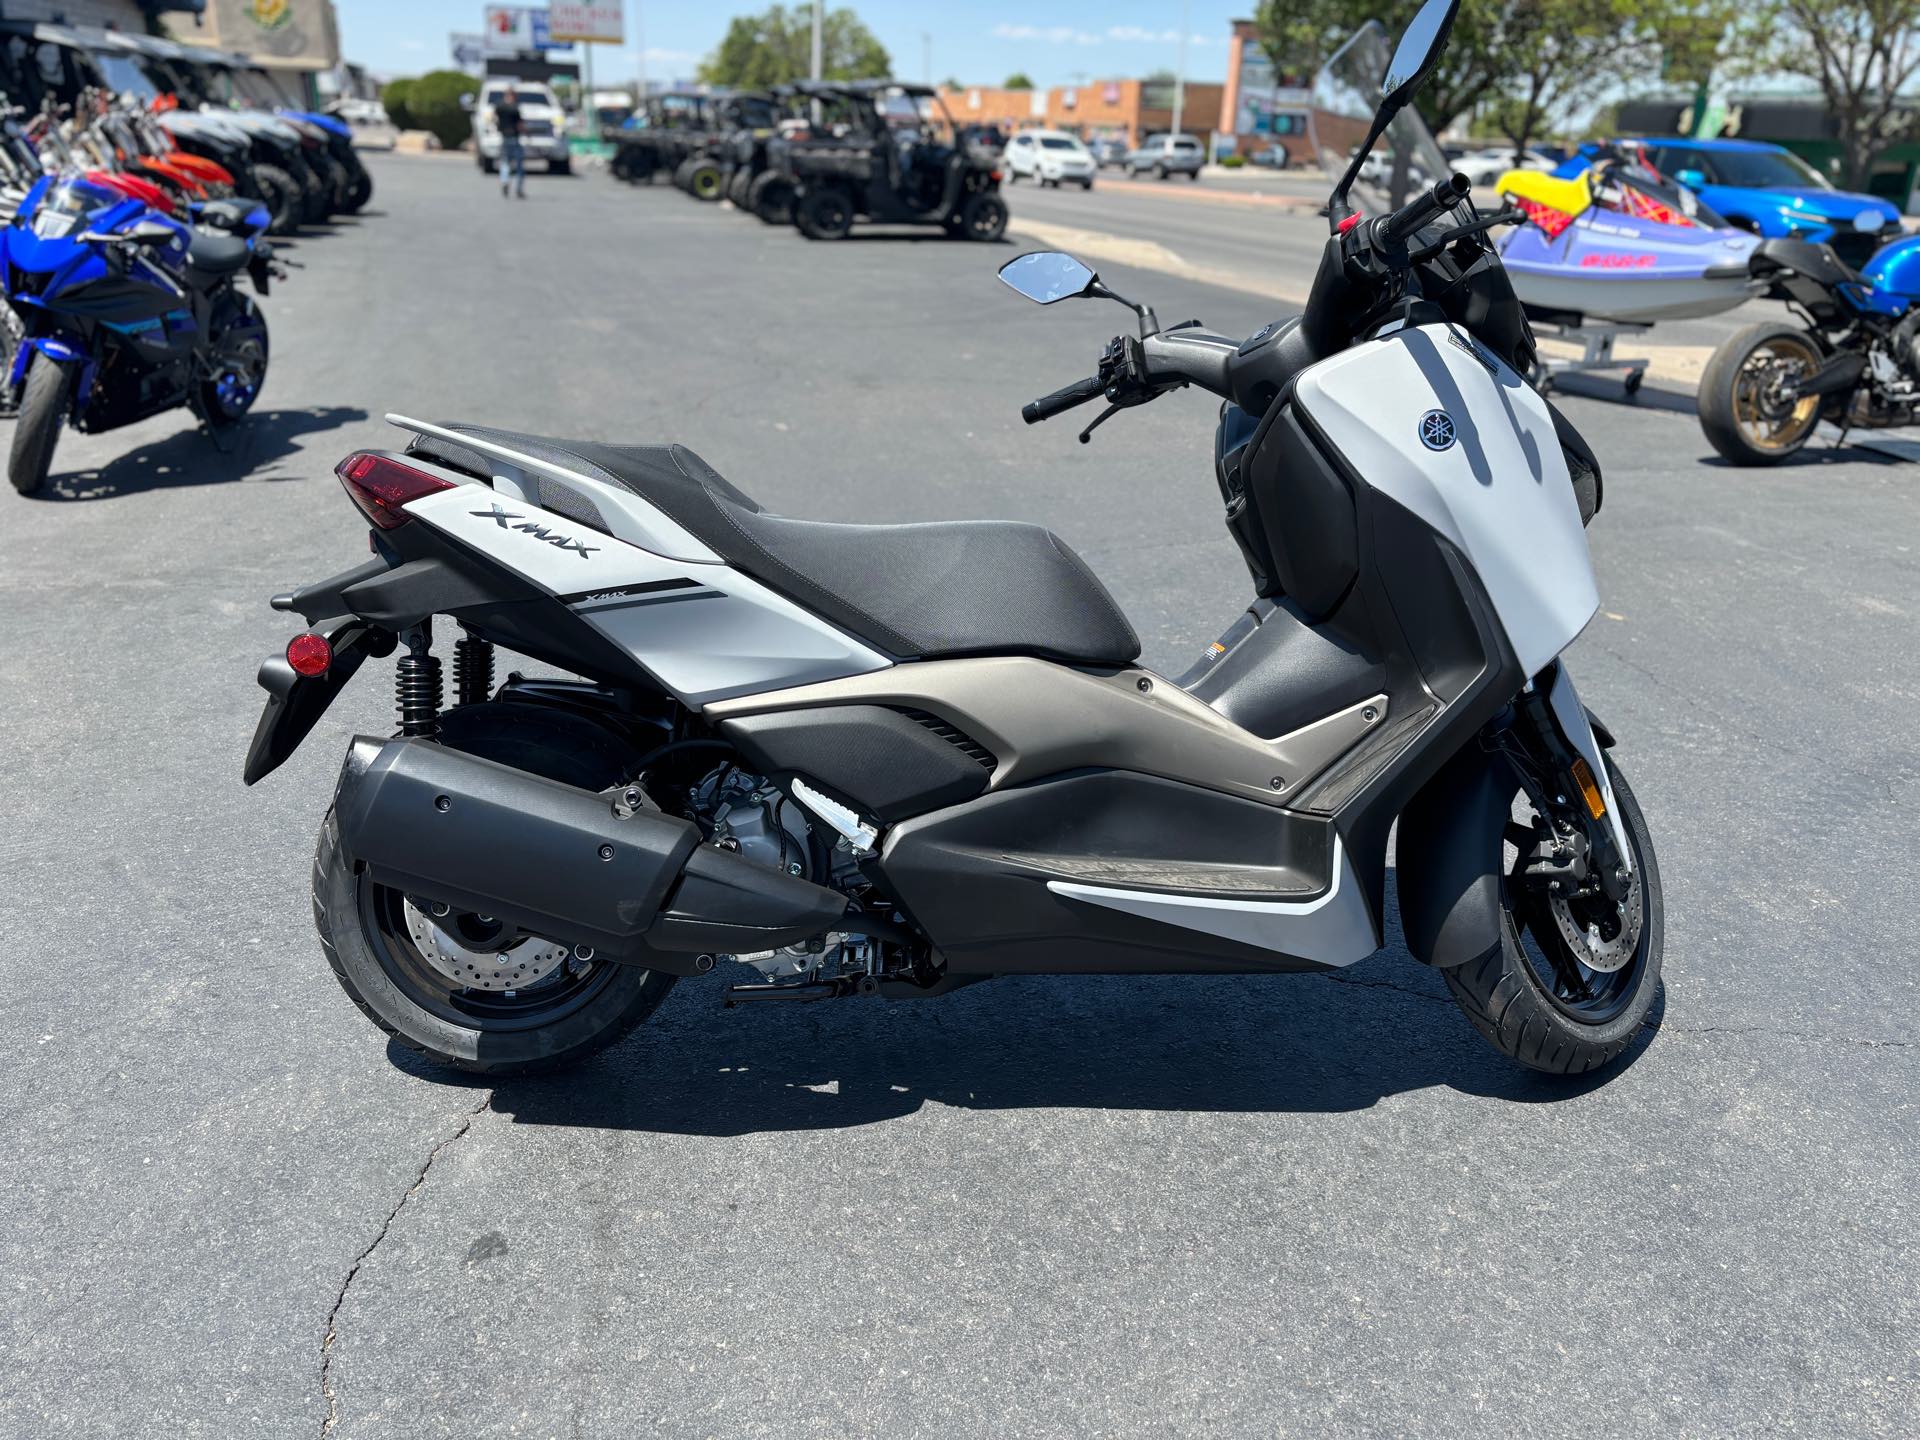 Our New Yamaha Inventory